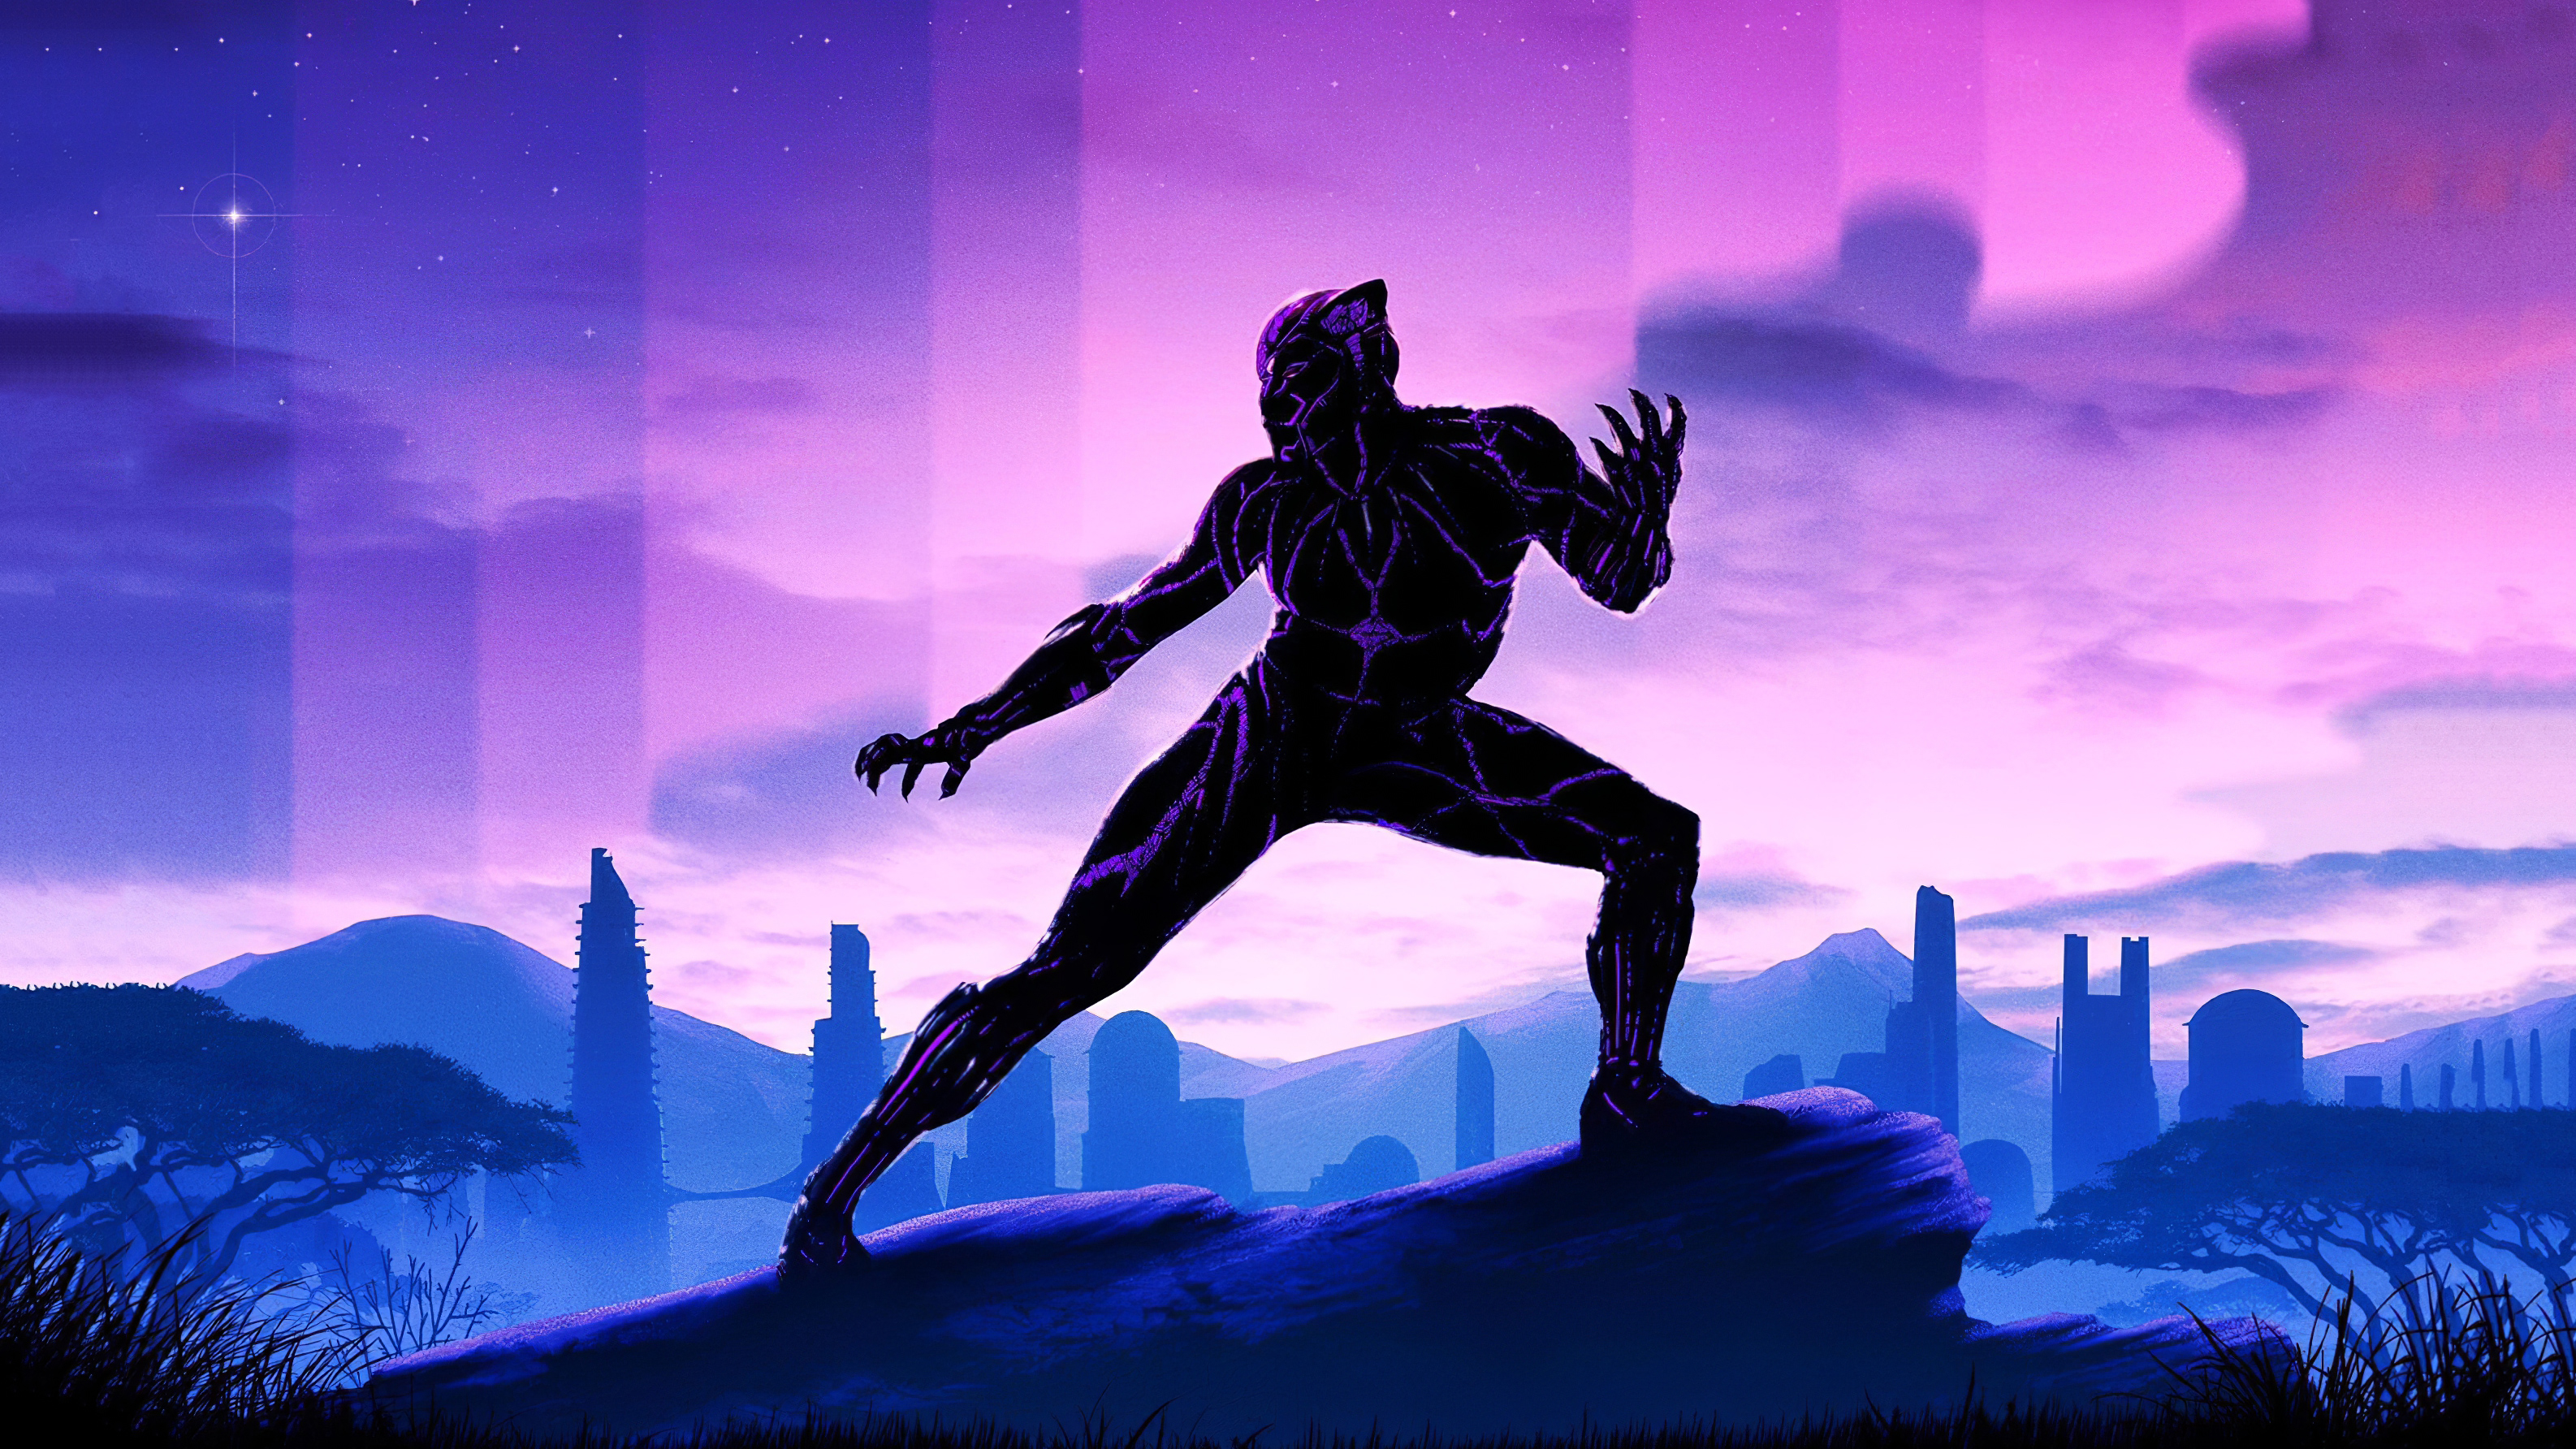 3840x Black Panther 3840x Resolution Wallpaper Hd Superheroes 4k Wallpapers Images Photos And Background Wallpapers Den